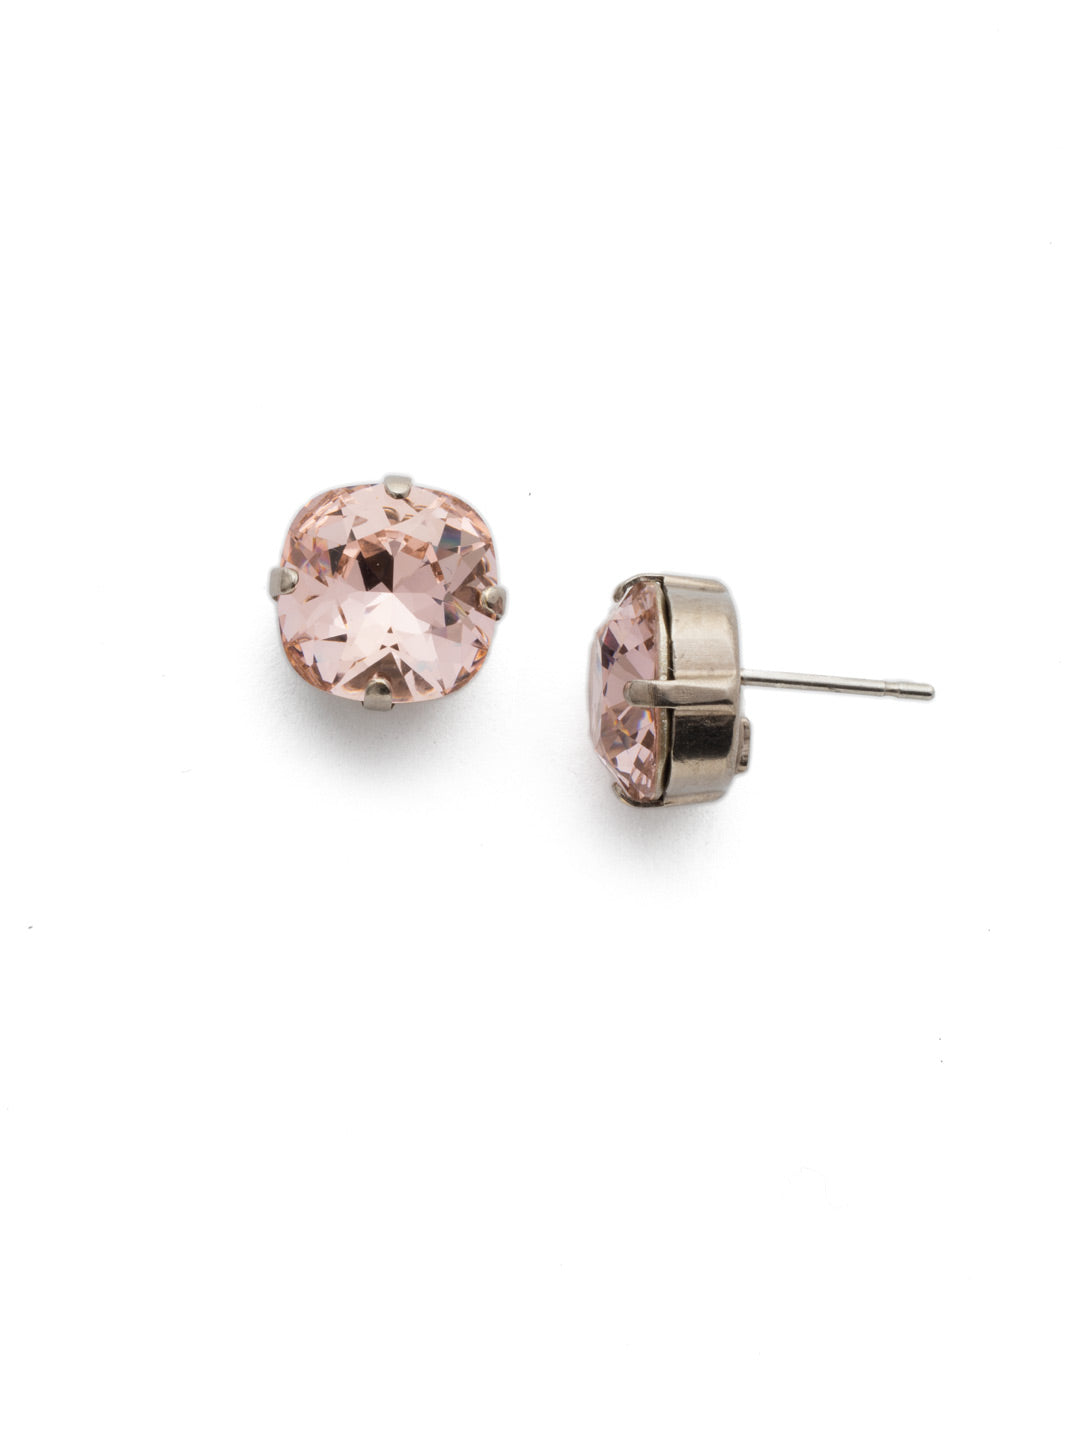 Halcyon Stud Earrings - EDH25ASVIN - A beautiful, luminous cushion-cut crystal in a classic four-pronged setting that's ideal for everyday wear. From Sorrelli's Vintage Rose collection in our Antique Silver-tone finish.